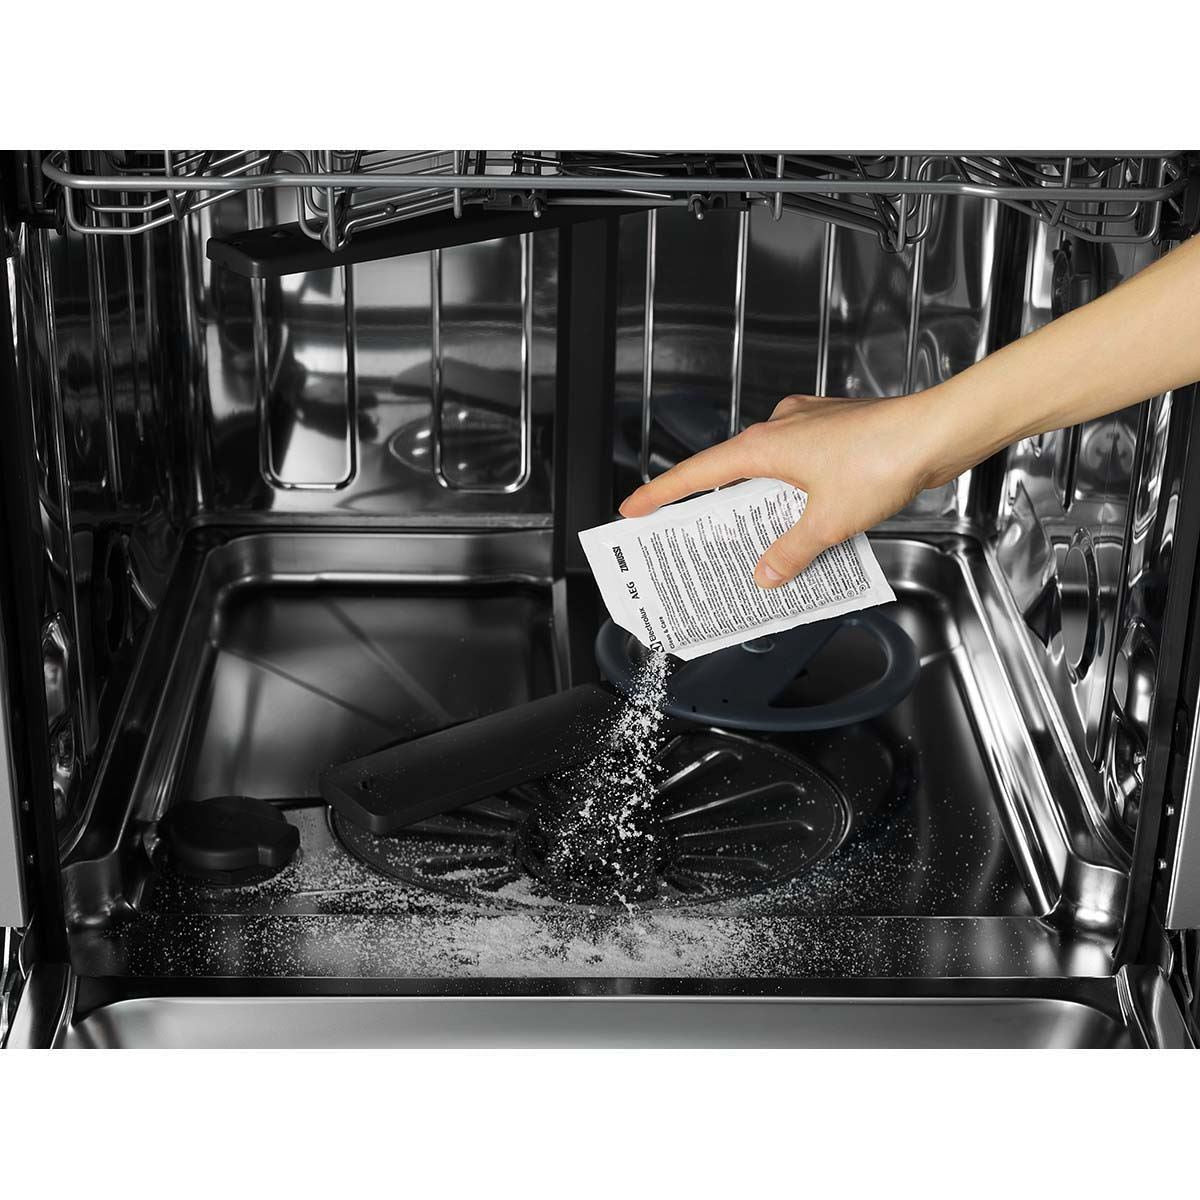 Electrolux Clean & Care 3-in-1 Washing Machines & dishwashers - 6 sachets (Descale & Clean)